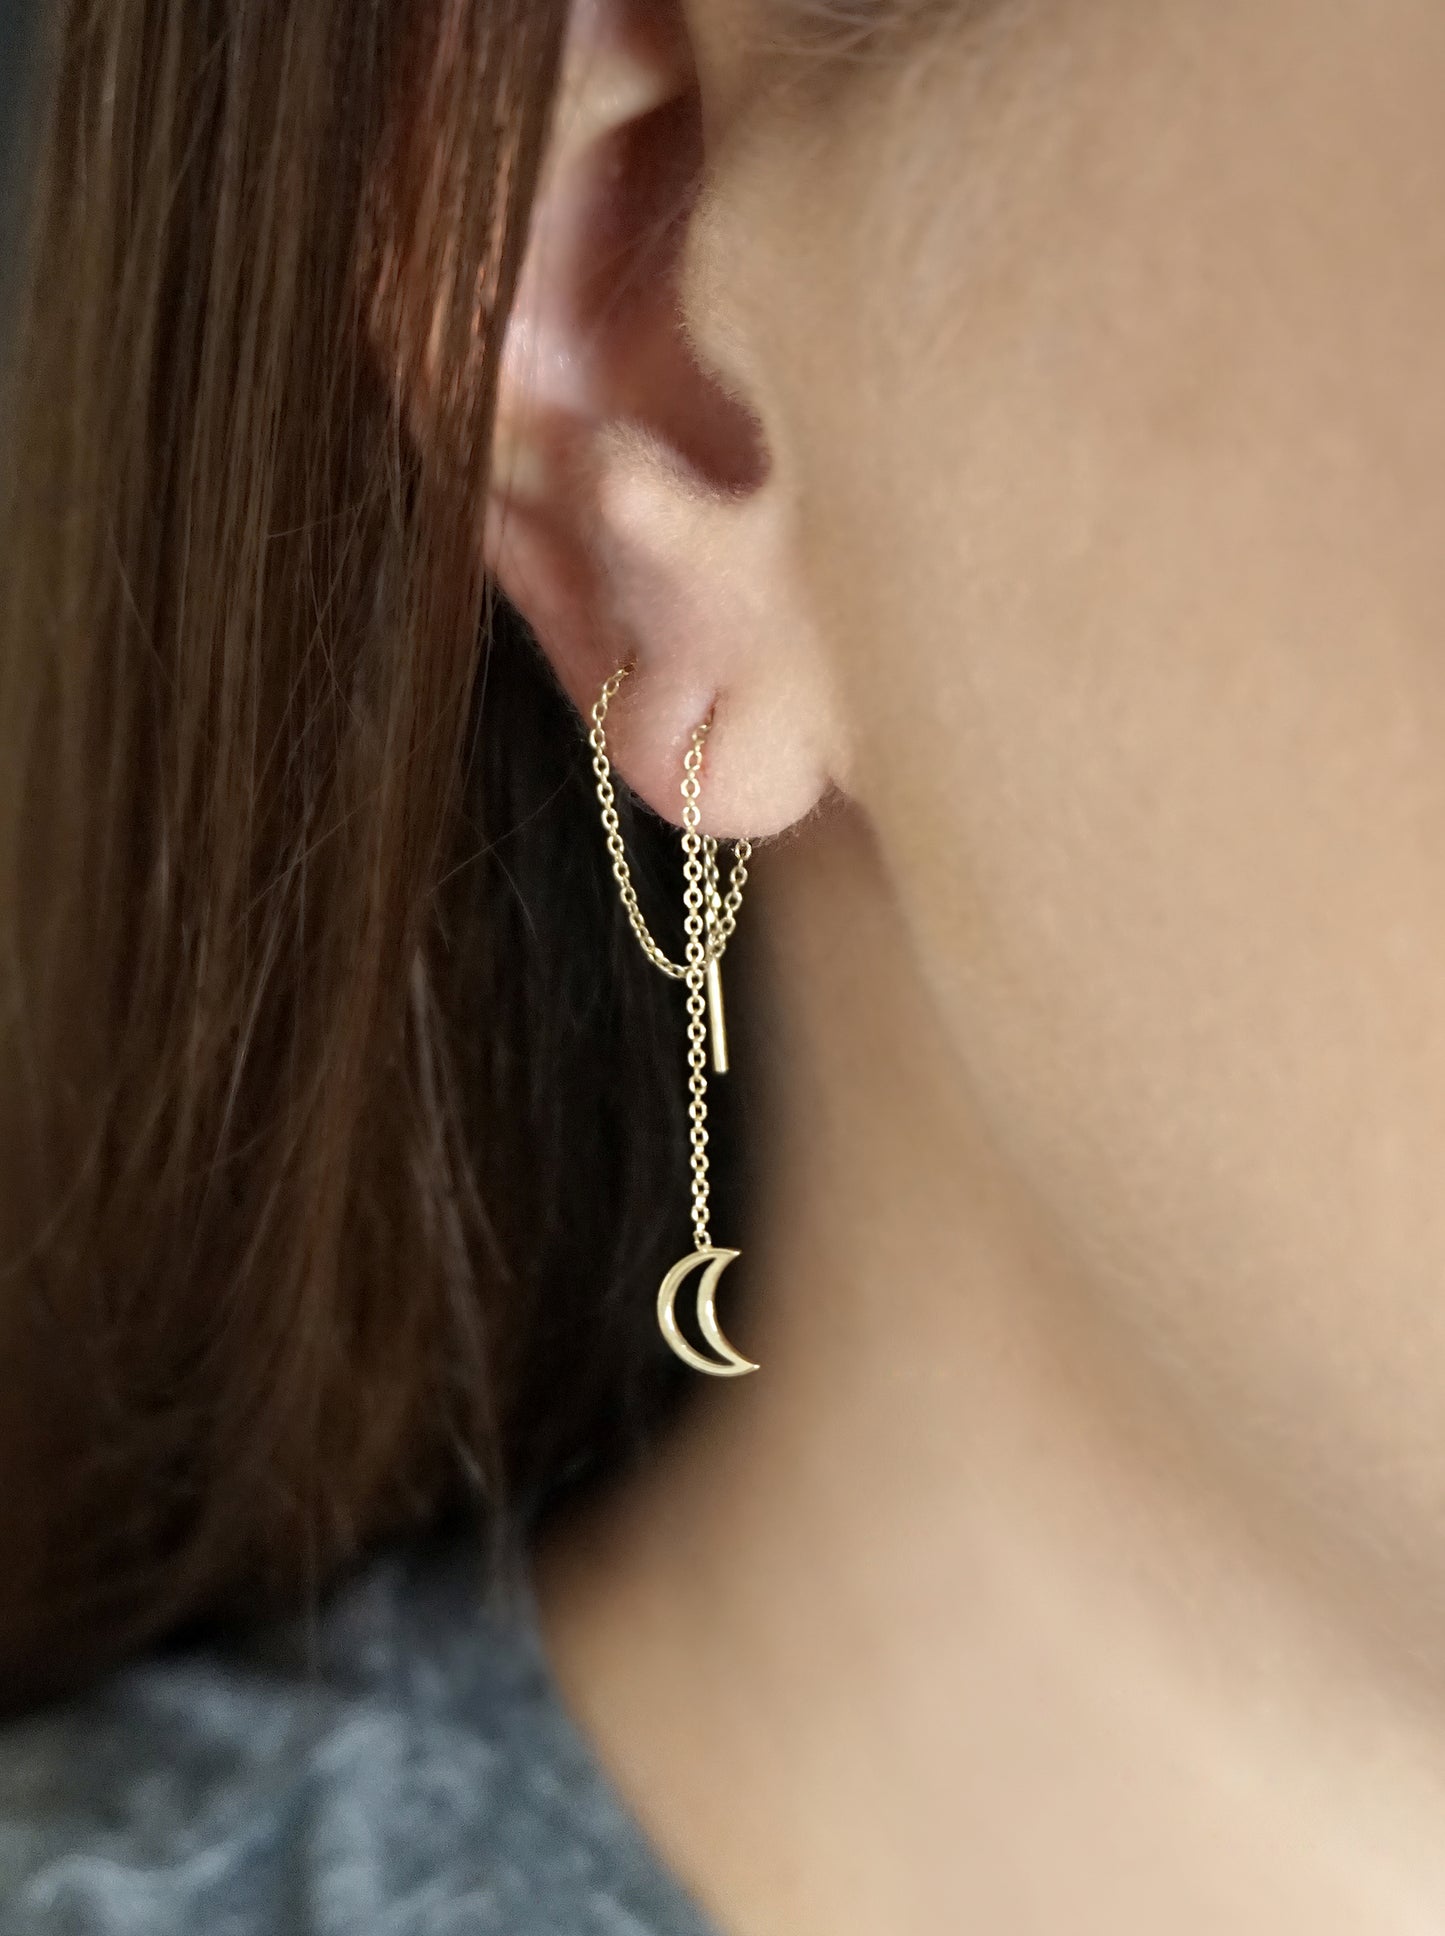 Solid Gold Threader Earrings with a Tiny Crescent Moon